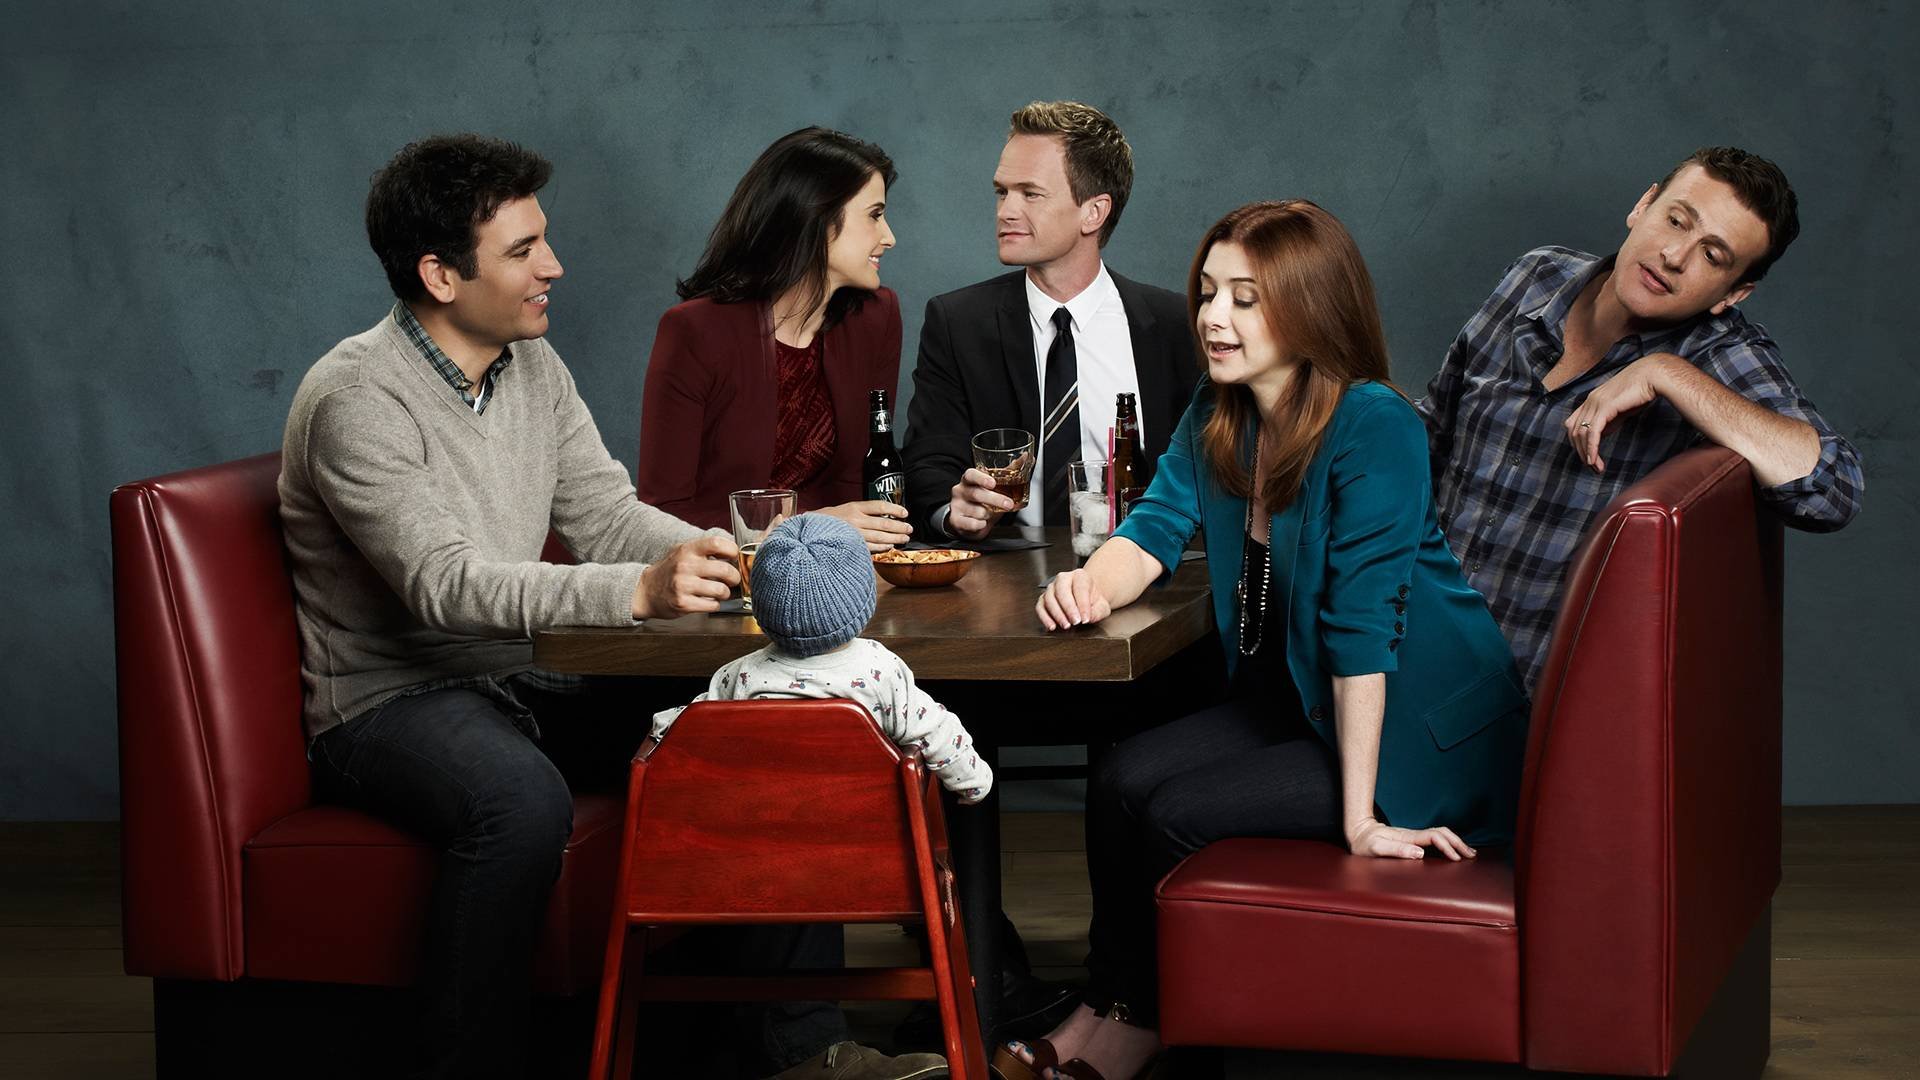 how i met your mother, Comedy, Sitcom, Series, Television, How, Met, Mother,  2 Wallpaper